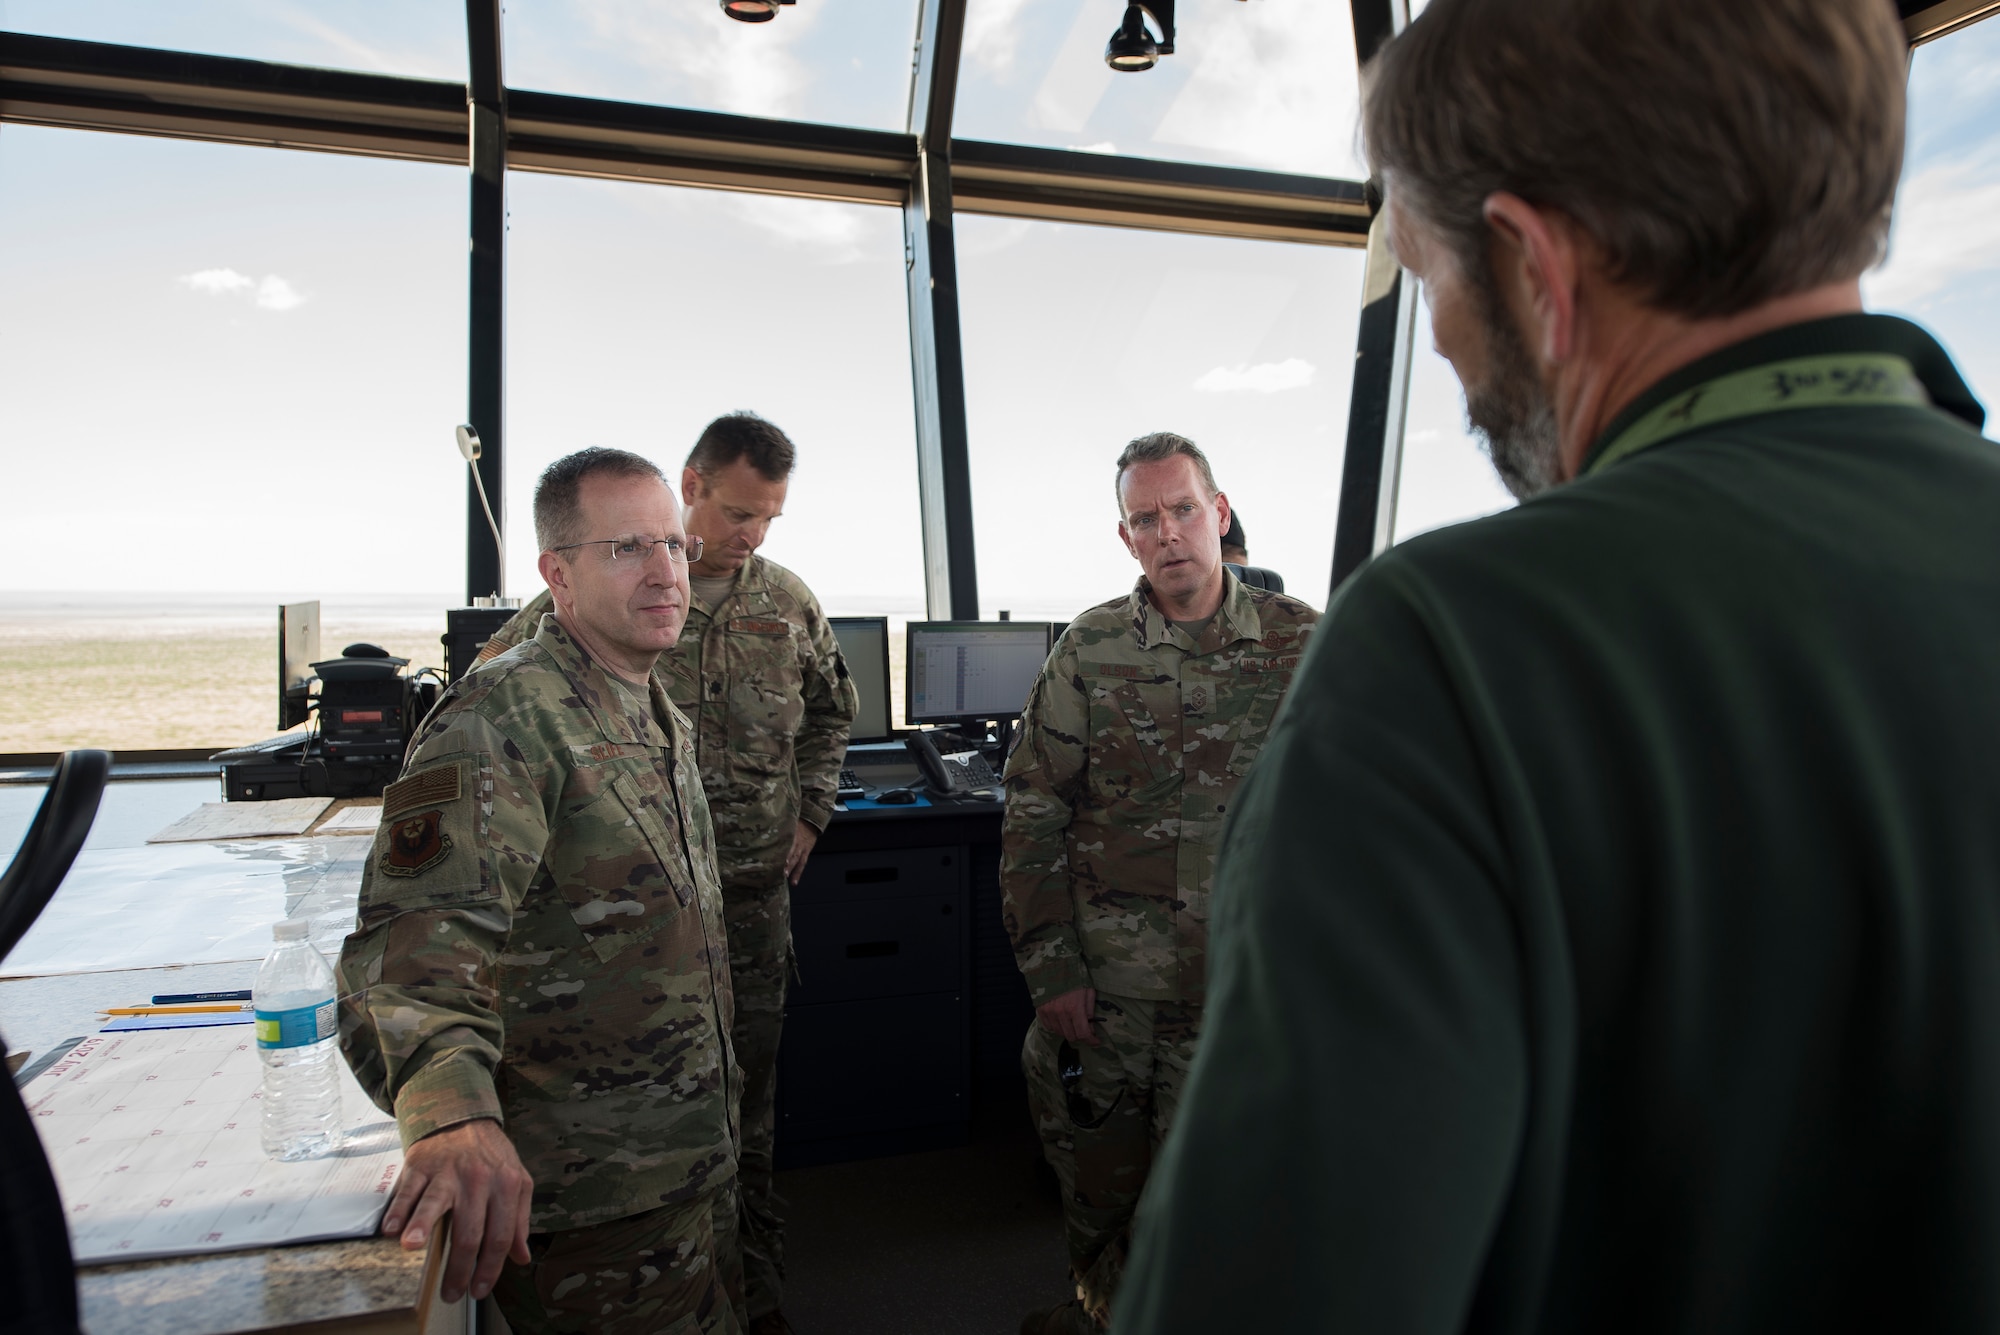 Lt. Gen. Jim Slife, Air Force Special Operations Command commander, and Chief Master Sgt. Cory Olson, AFSOC command chief, receive a briefing on the capabilities of the air traffic control tower at Melrose Air Force Range, N.M., from Steve Coffin, 27th Special Operations Air Operations Squadron director of MAFR, July 15, 2019. Slife and Olson toured the range and facilities utilized by Air Commandos. Before the tour, Slife and Olson met with local and state leaders. (U.S. Air Force photo by Senior Airman Vernon R. Walter III)